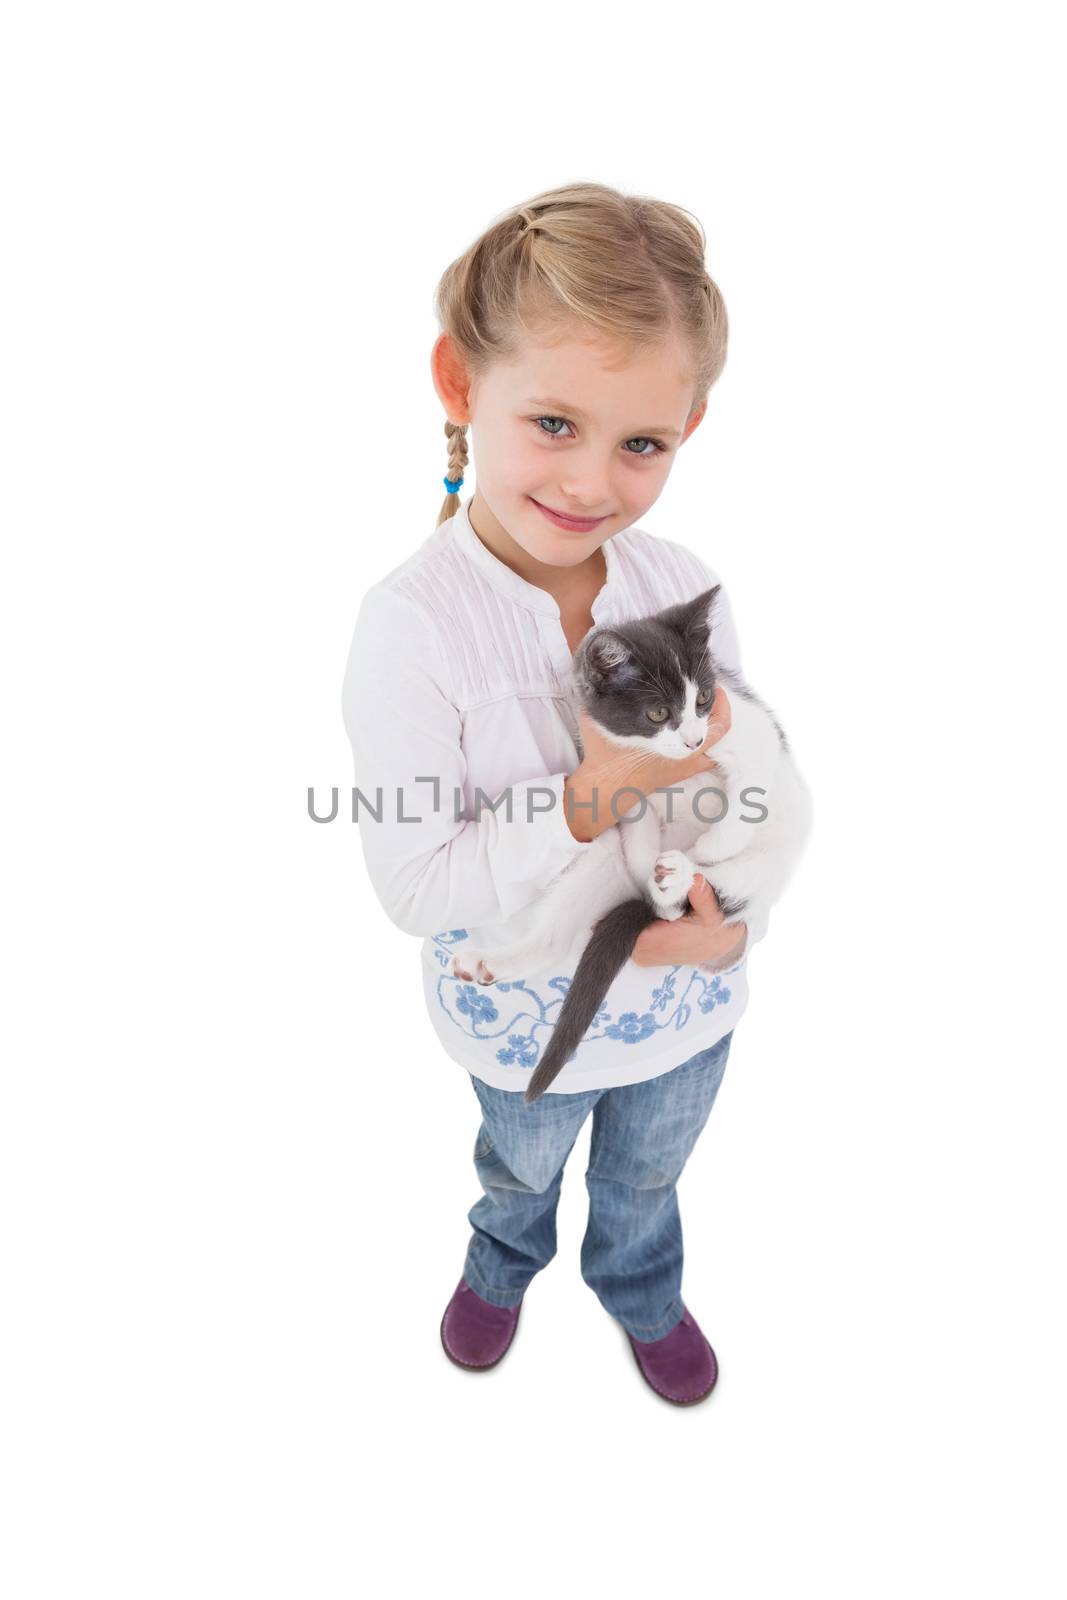 Smiling little girl with her cute kitten on white background